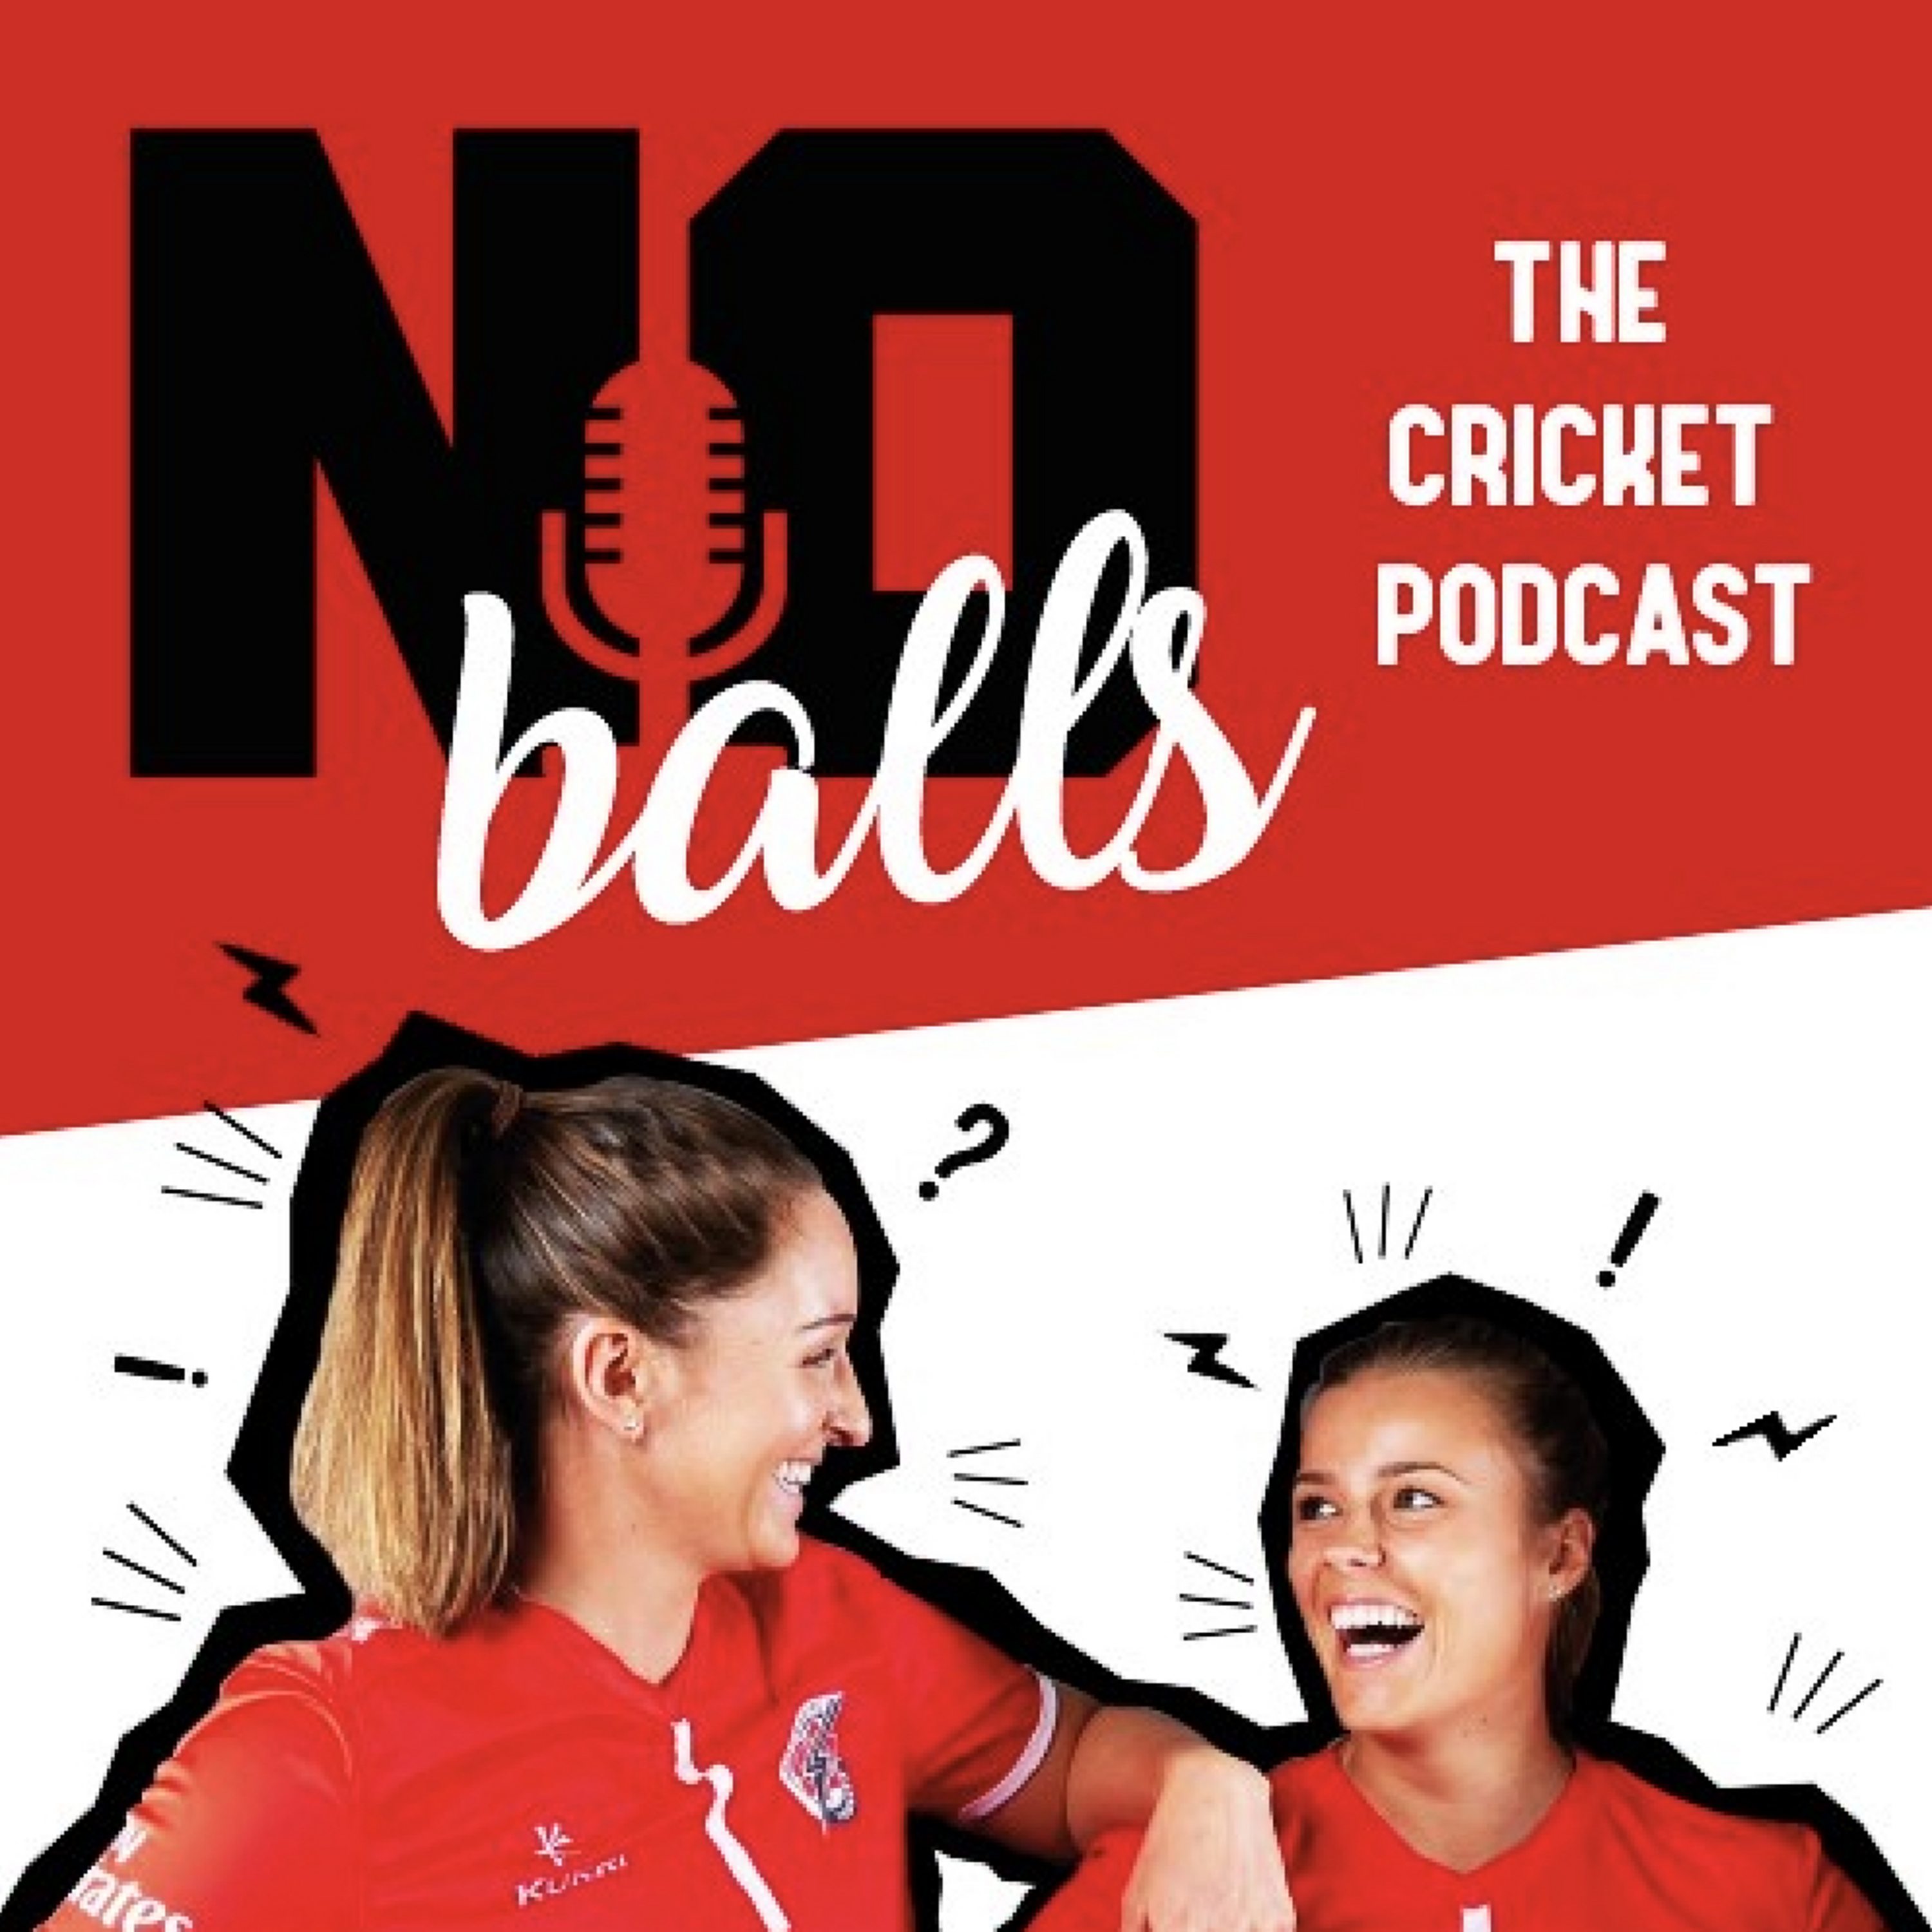 No Balls: The Cricket Podcast - Never knowingly under-bowled